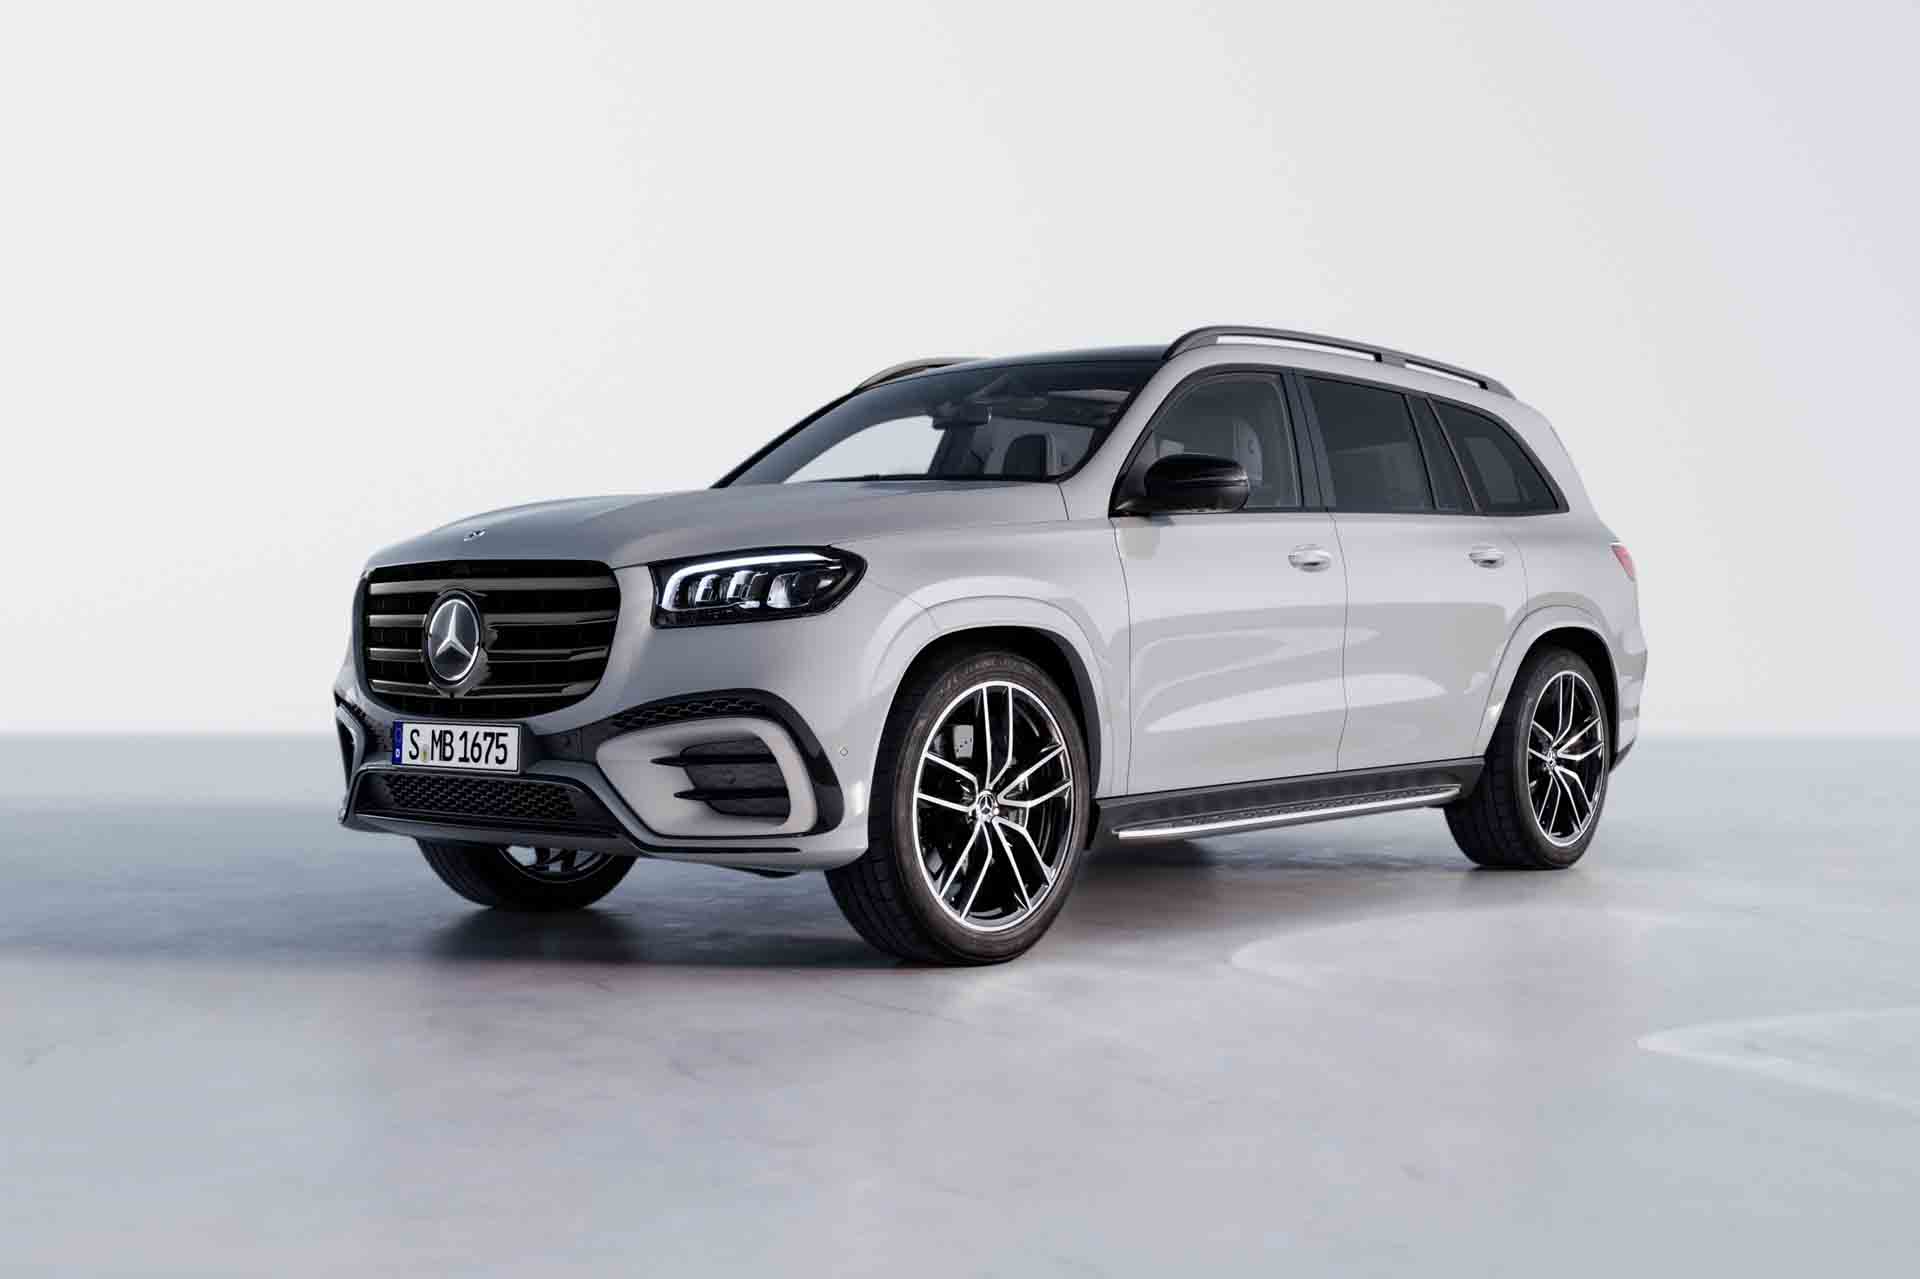 Mercedes Benz Car AccessoriesDiscover posh products online